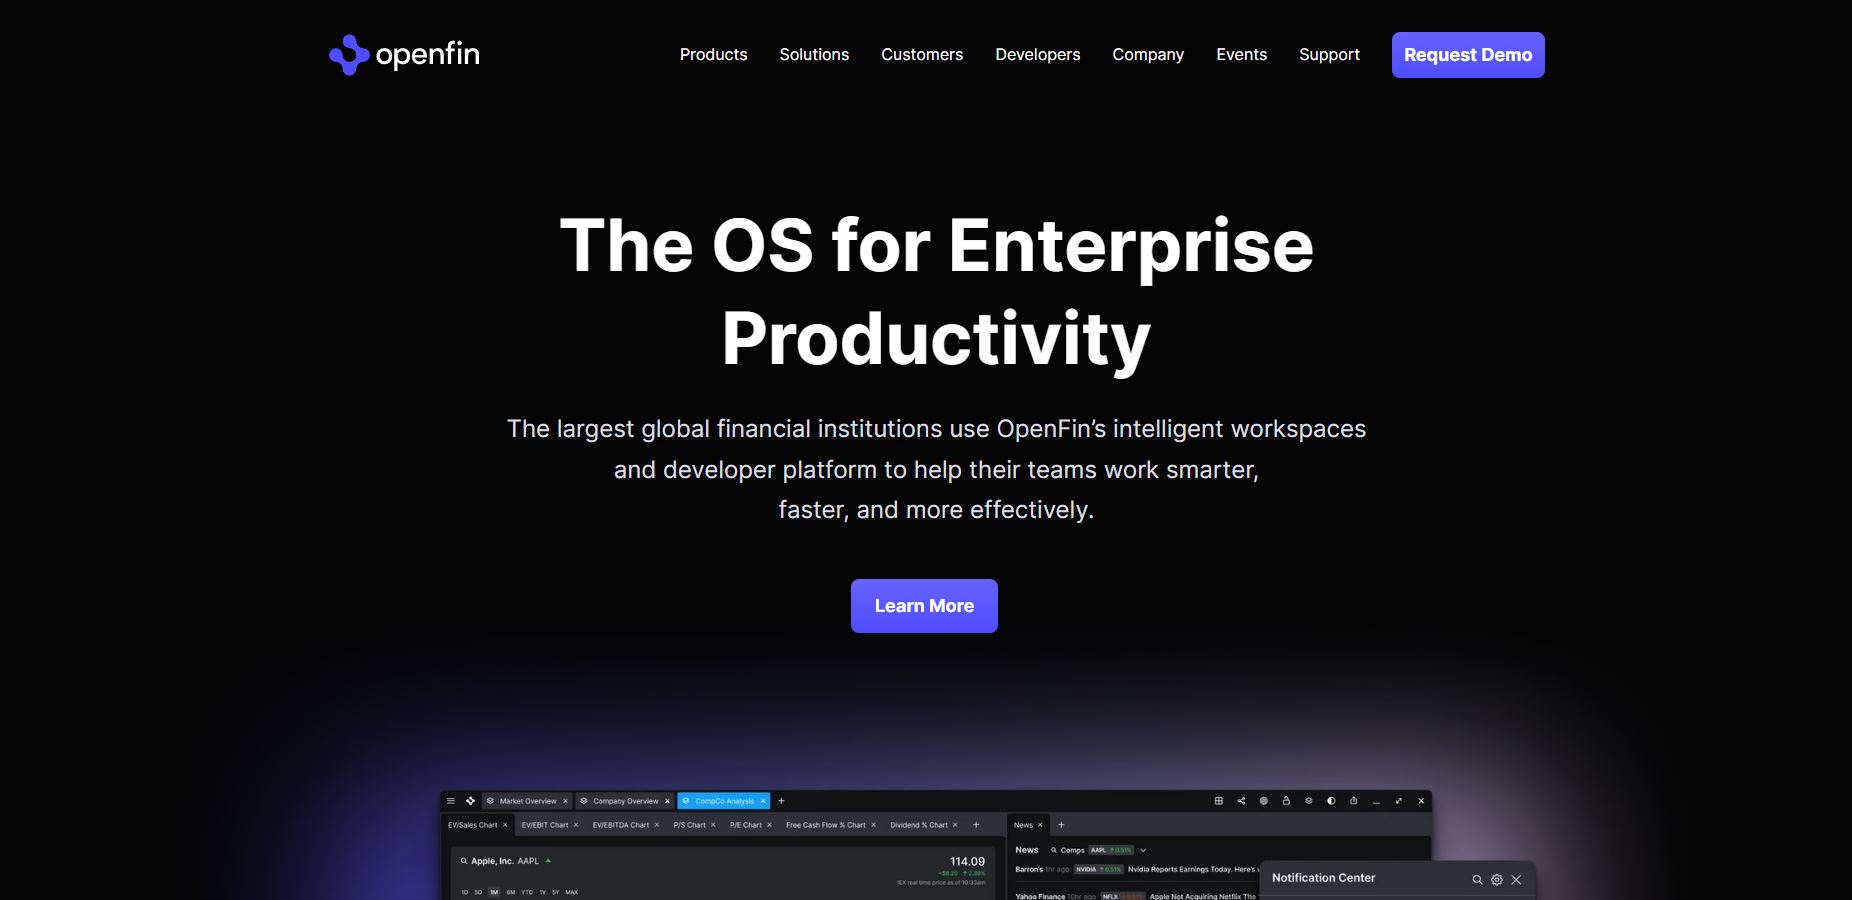 With an impressive $35M raised in Series D funding, OpenFin is redefining the concept of enterprise operating systems